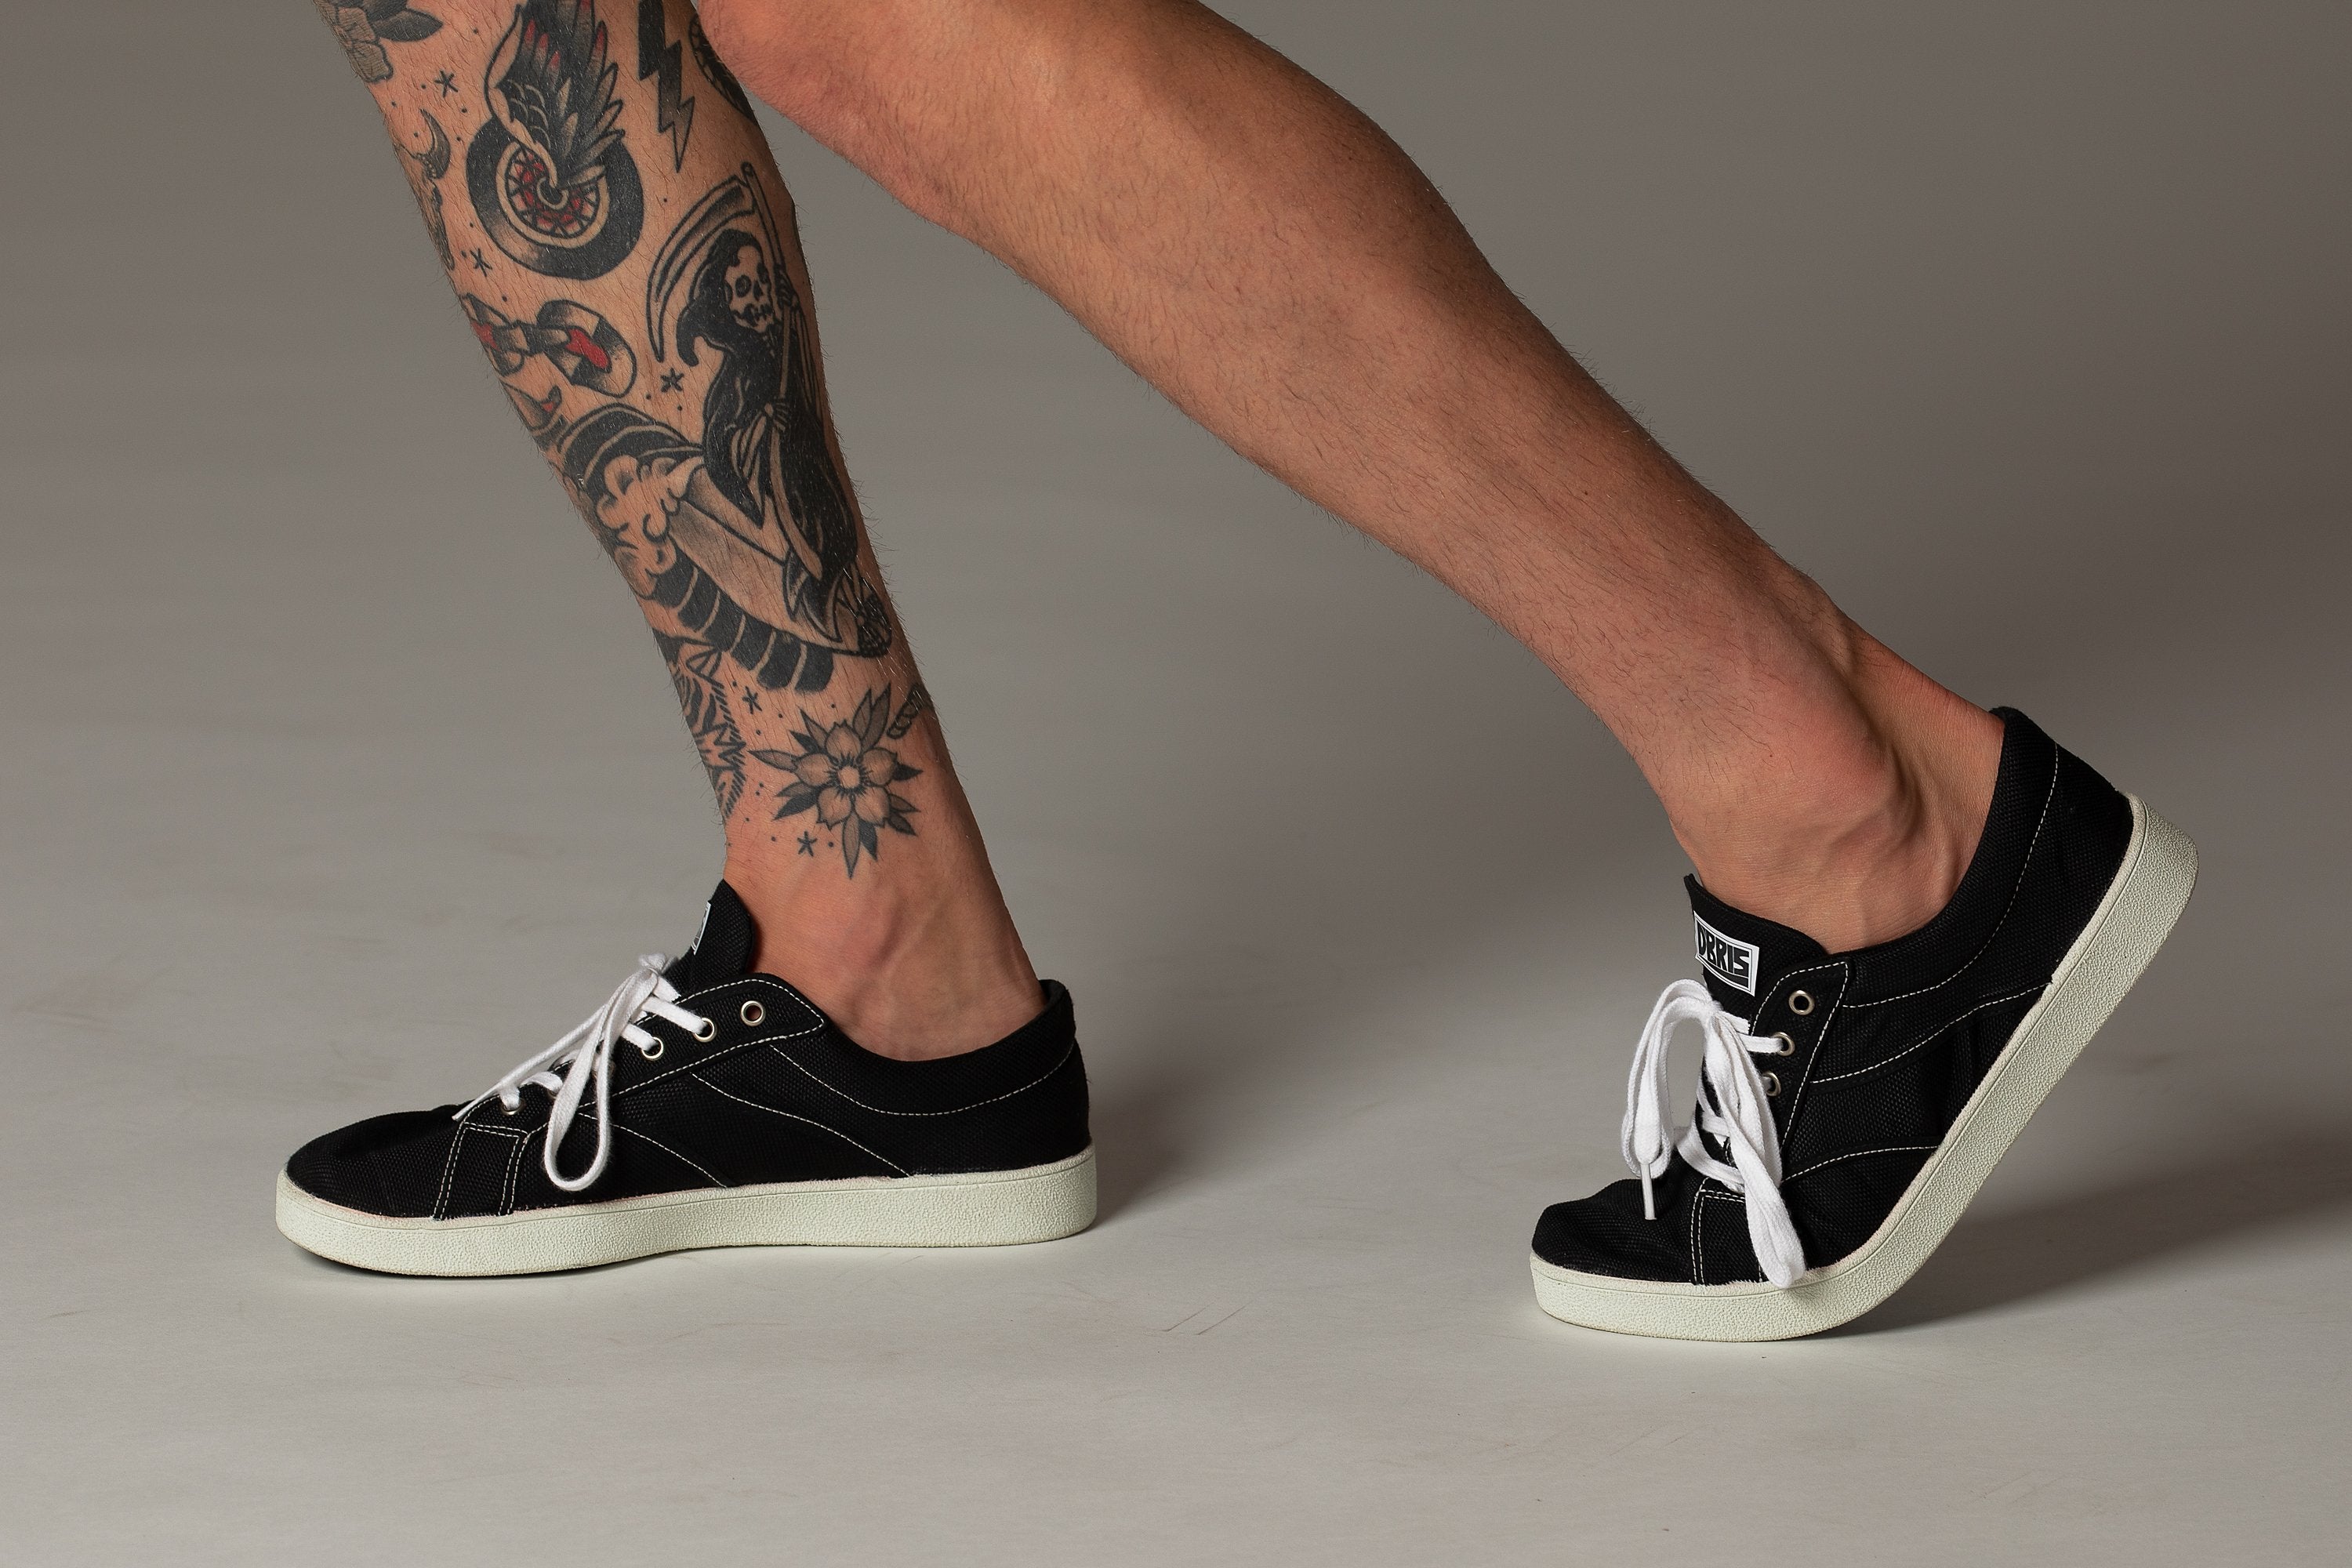 Sneaker Brands For The Best Sustainable (And Stylish) White Sneakers |  Ethical Made Easy